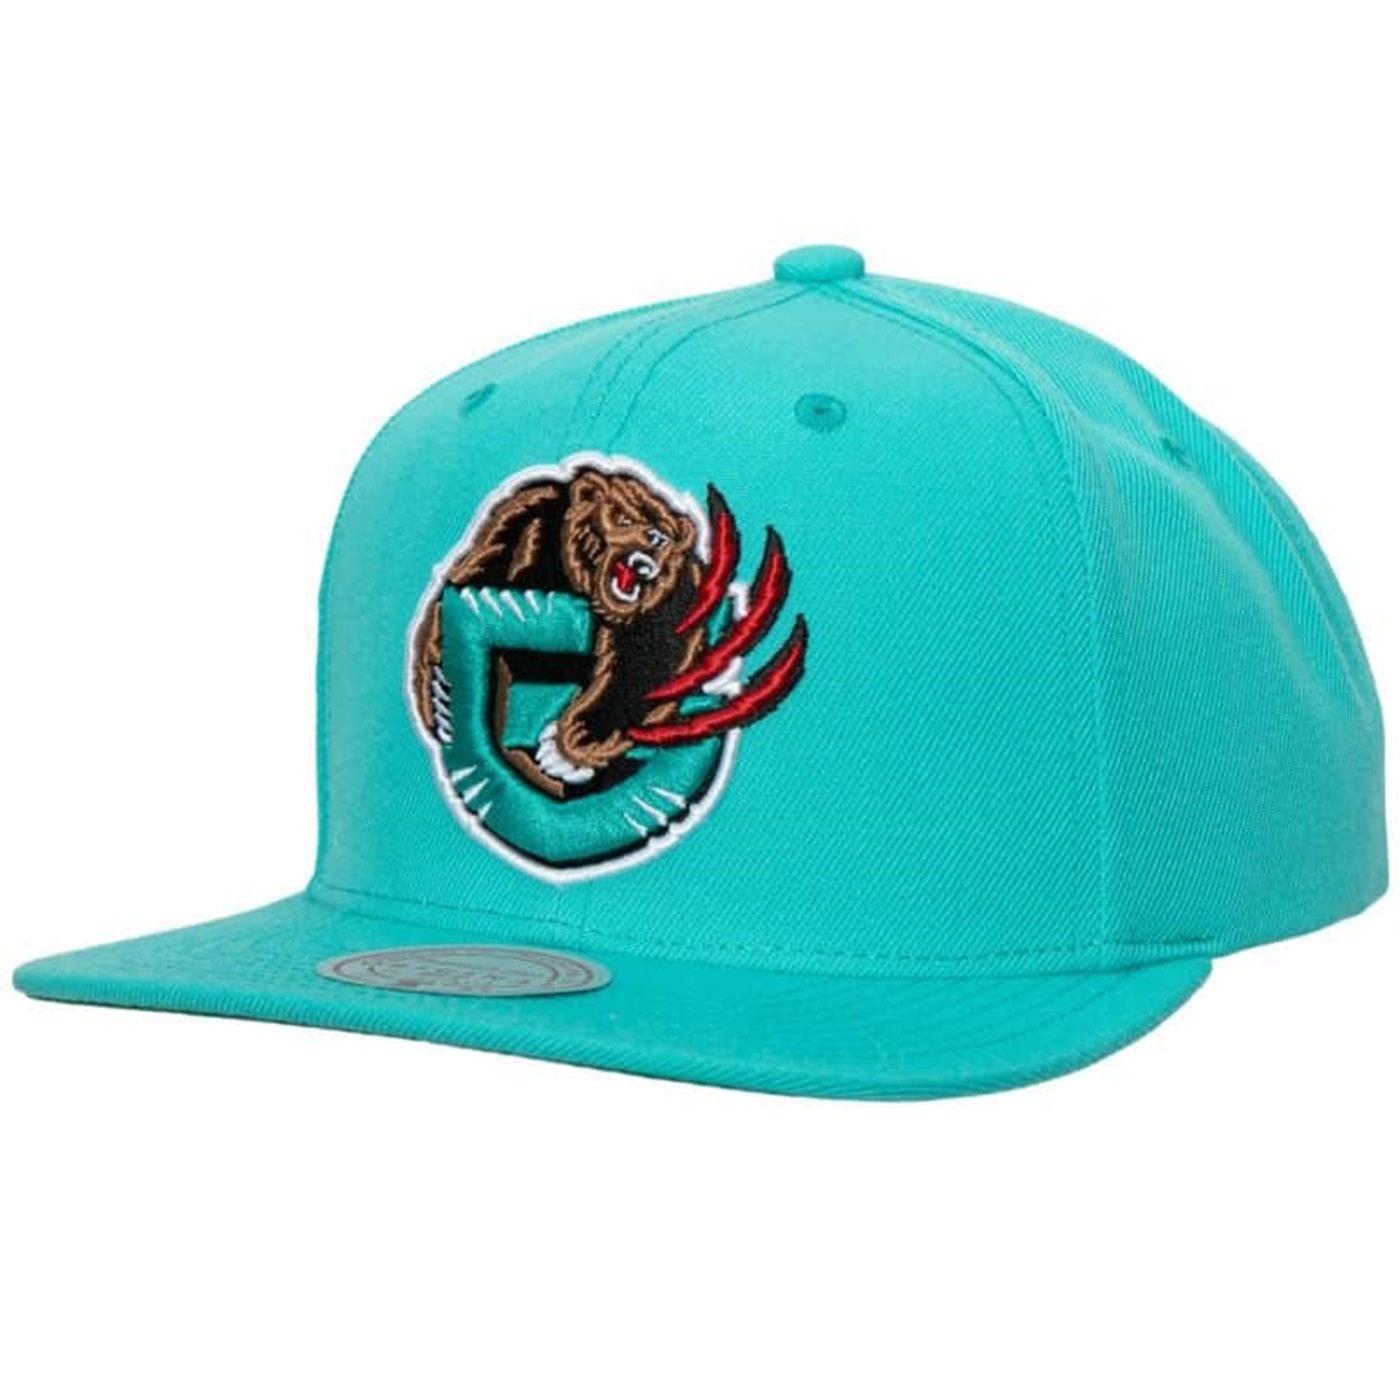 Team Ground 2.0 Snapback HWC Vancouver Grizzlies | Mitchell & Ness